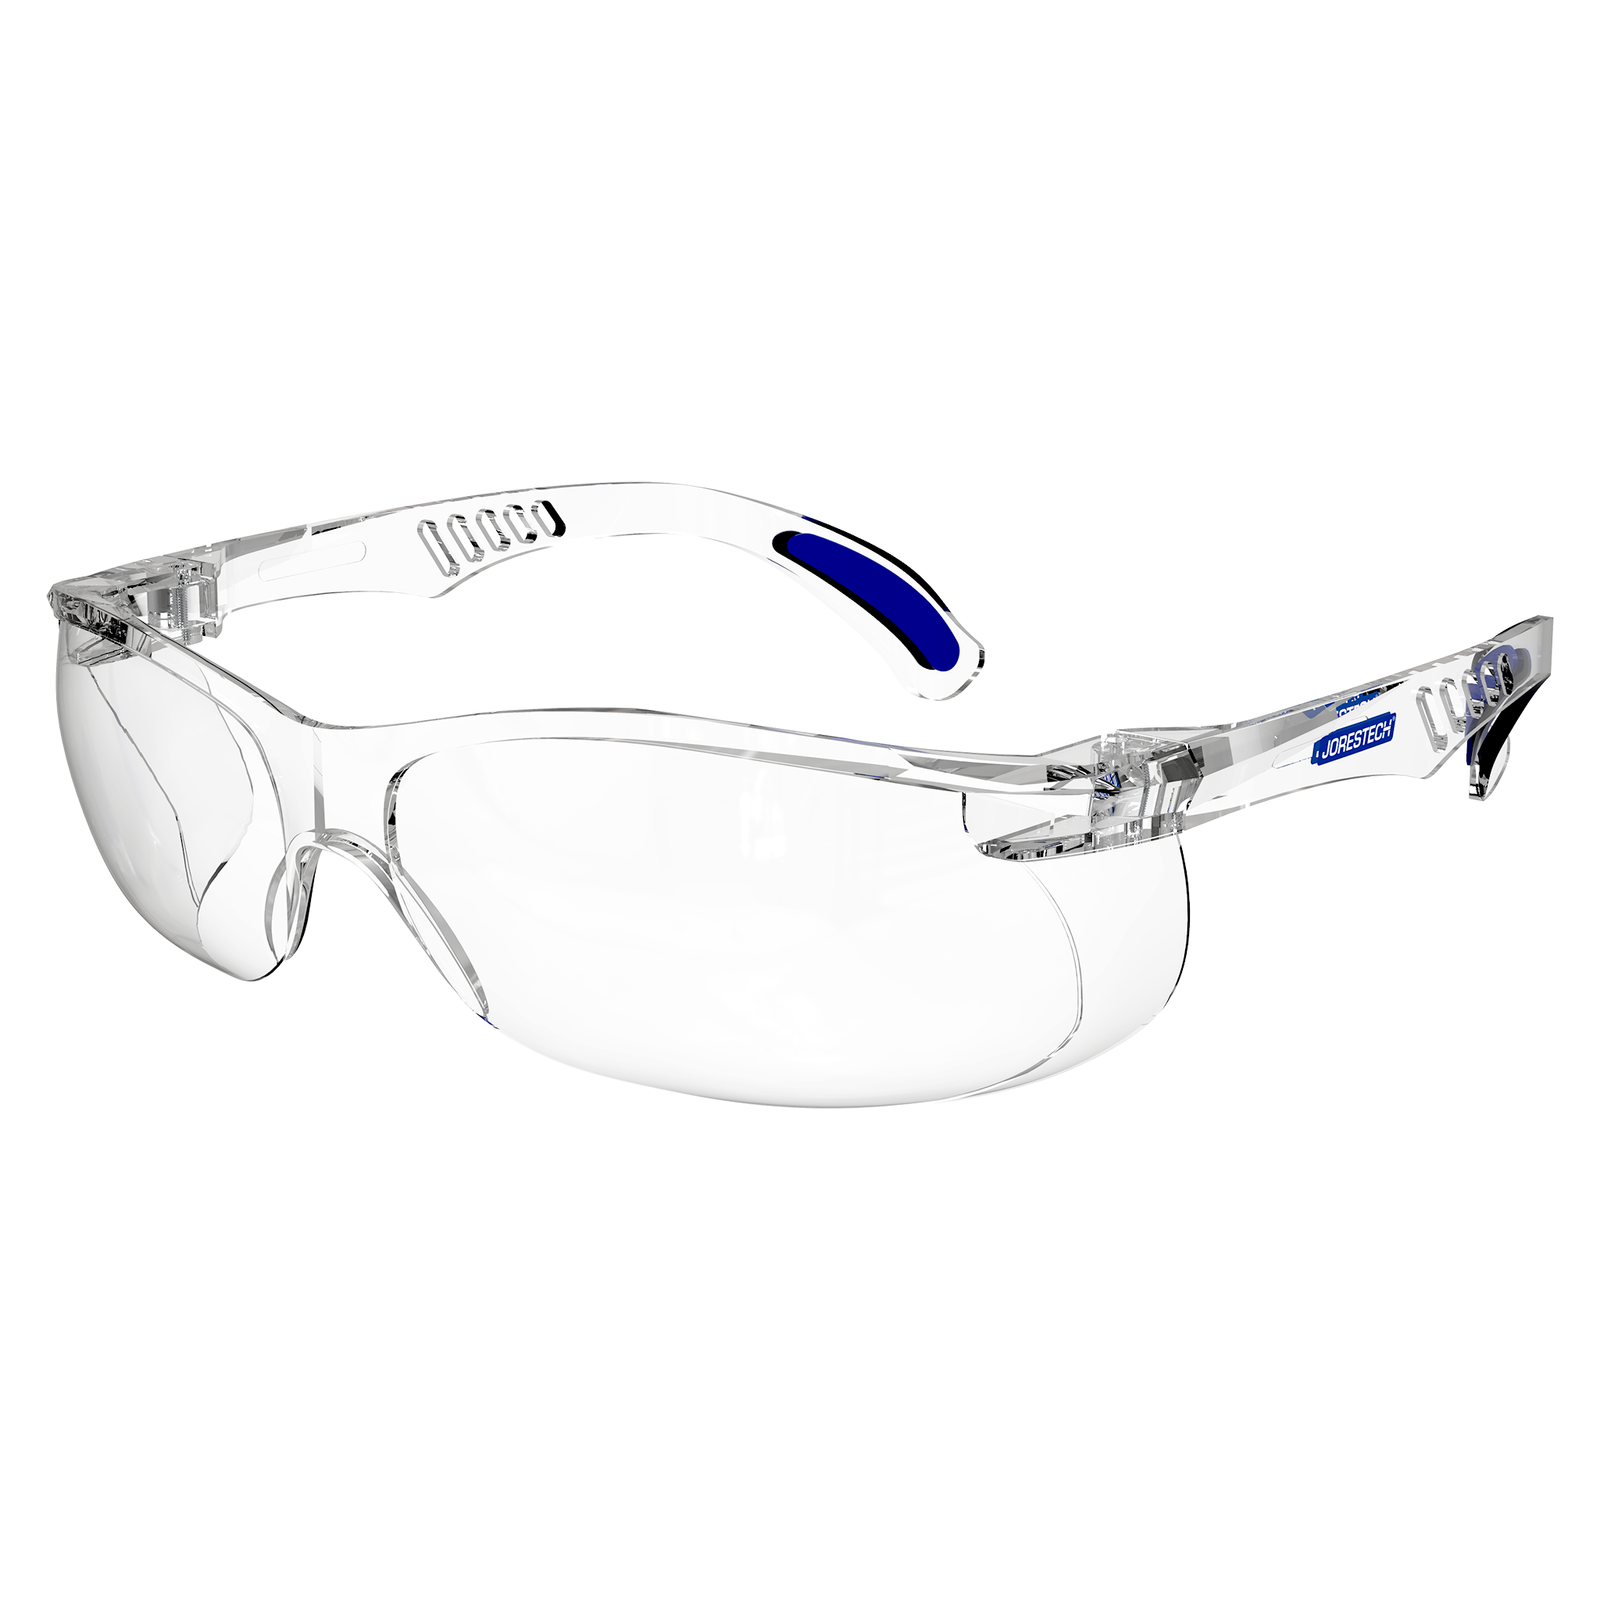 Diagonal view of the clear JORESTECH panoramic safety glass with side shields for high impact protection.  Temples of this ANSI compliant glasses have details in black